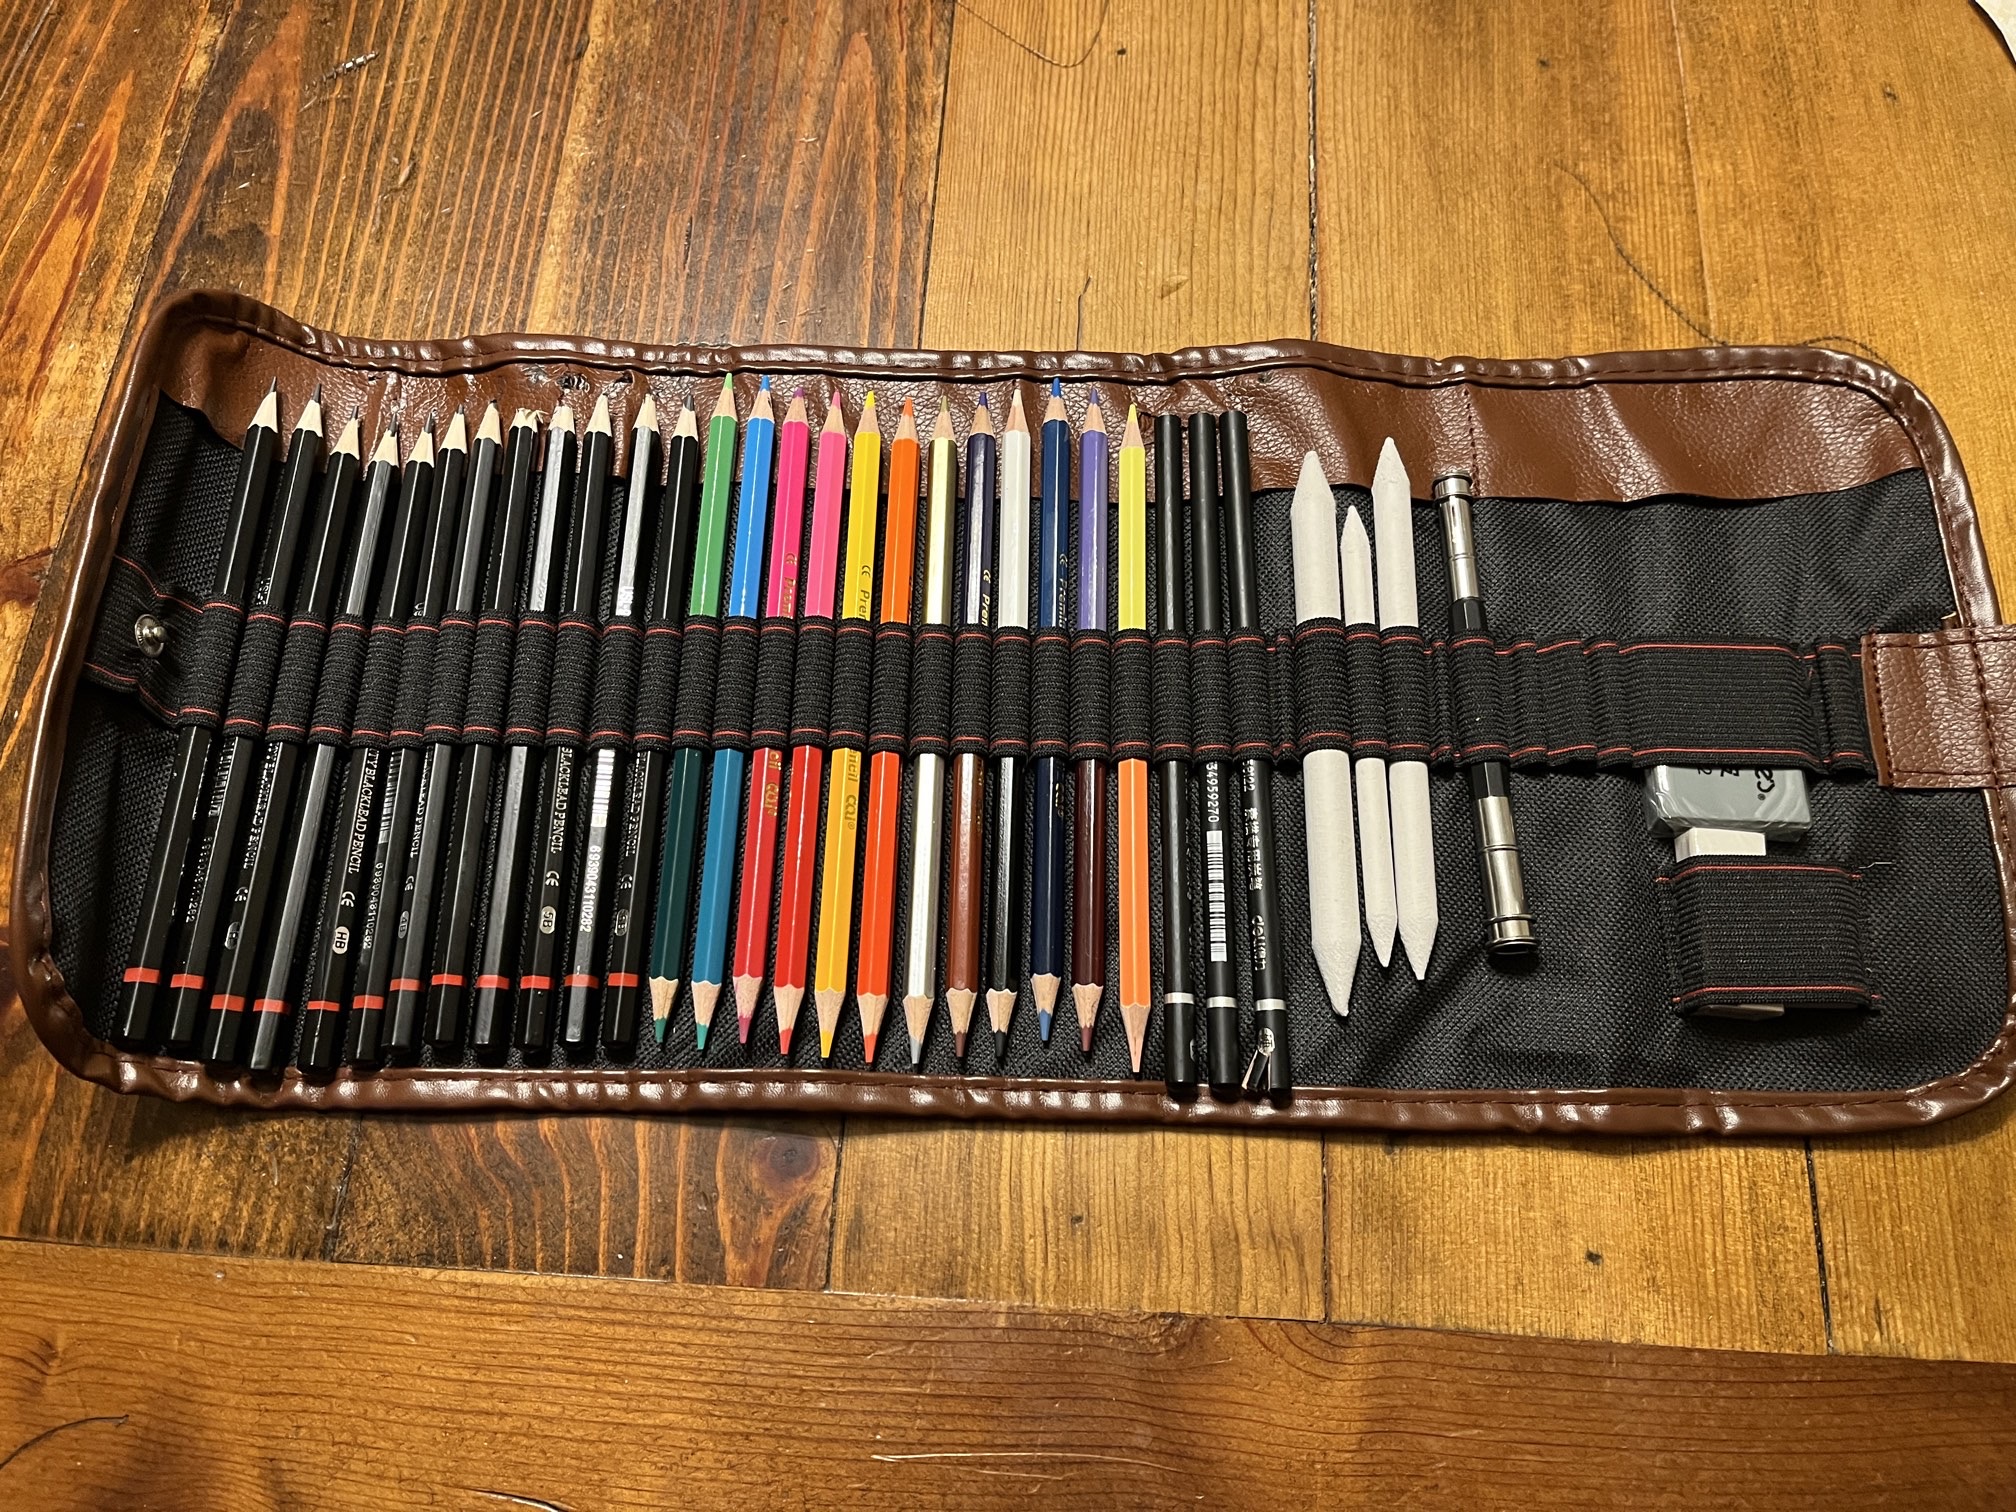 Roll-Up set of artist colored pencils